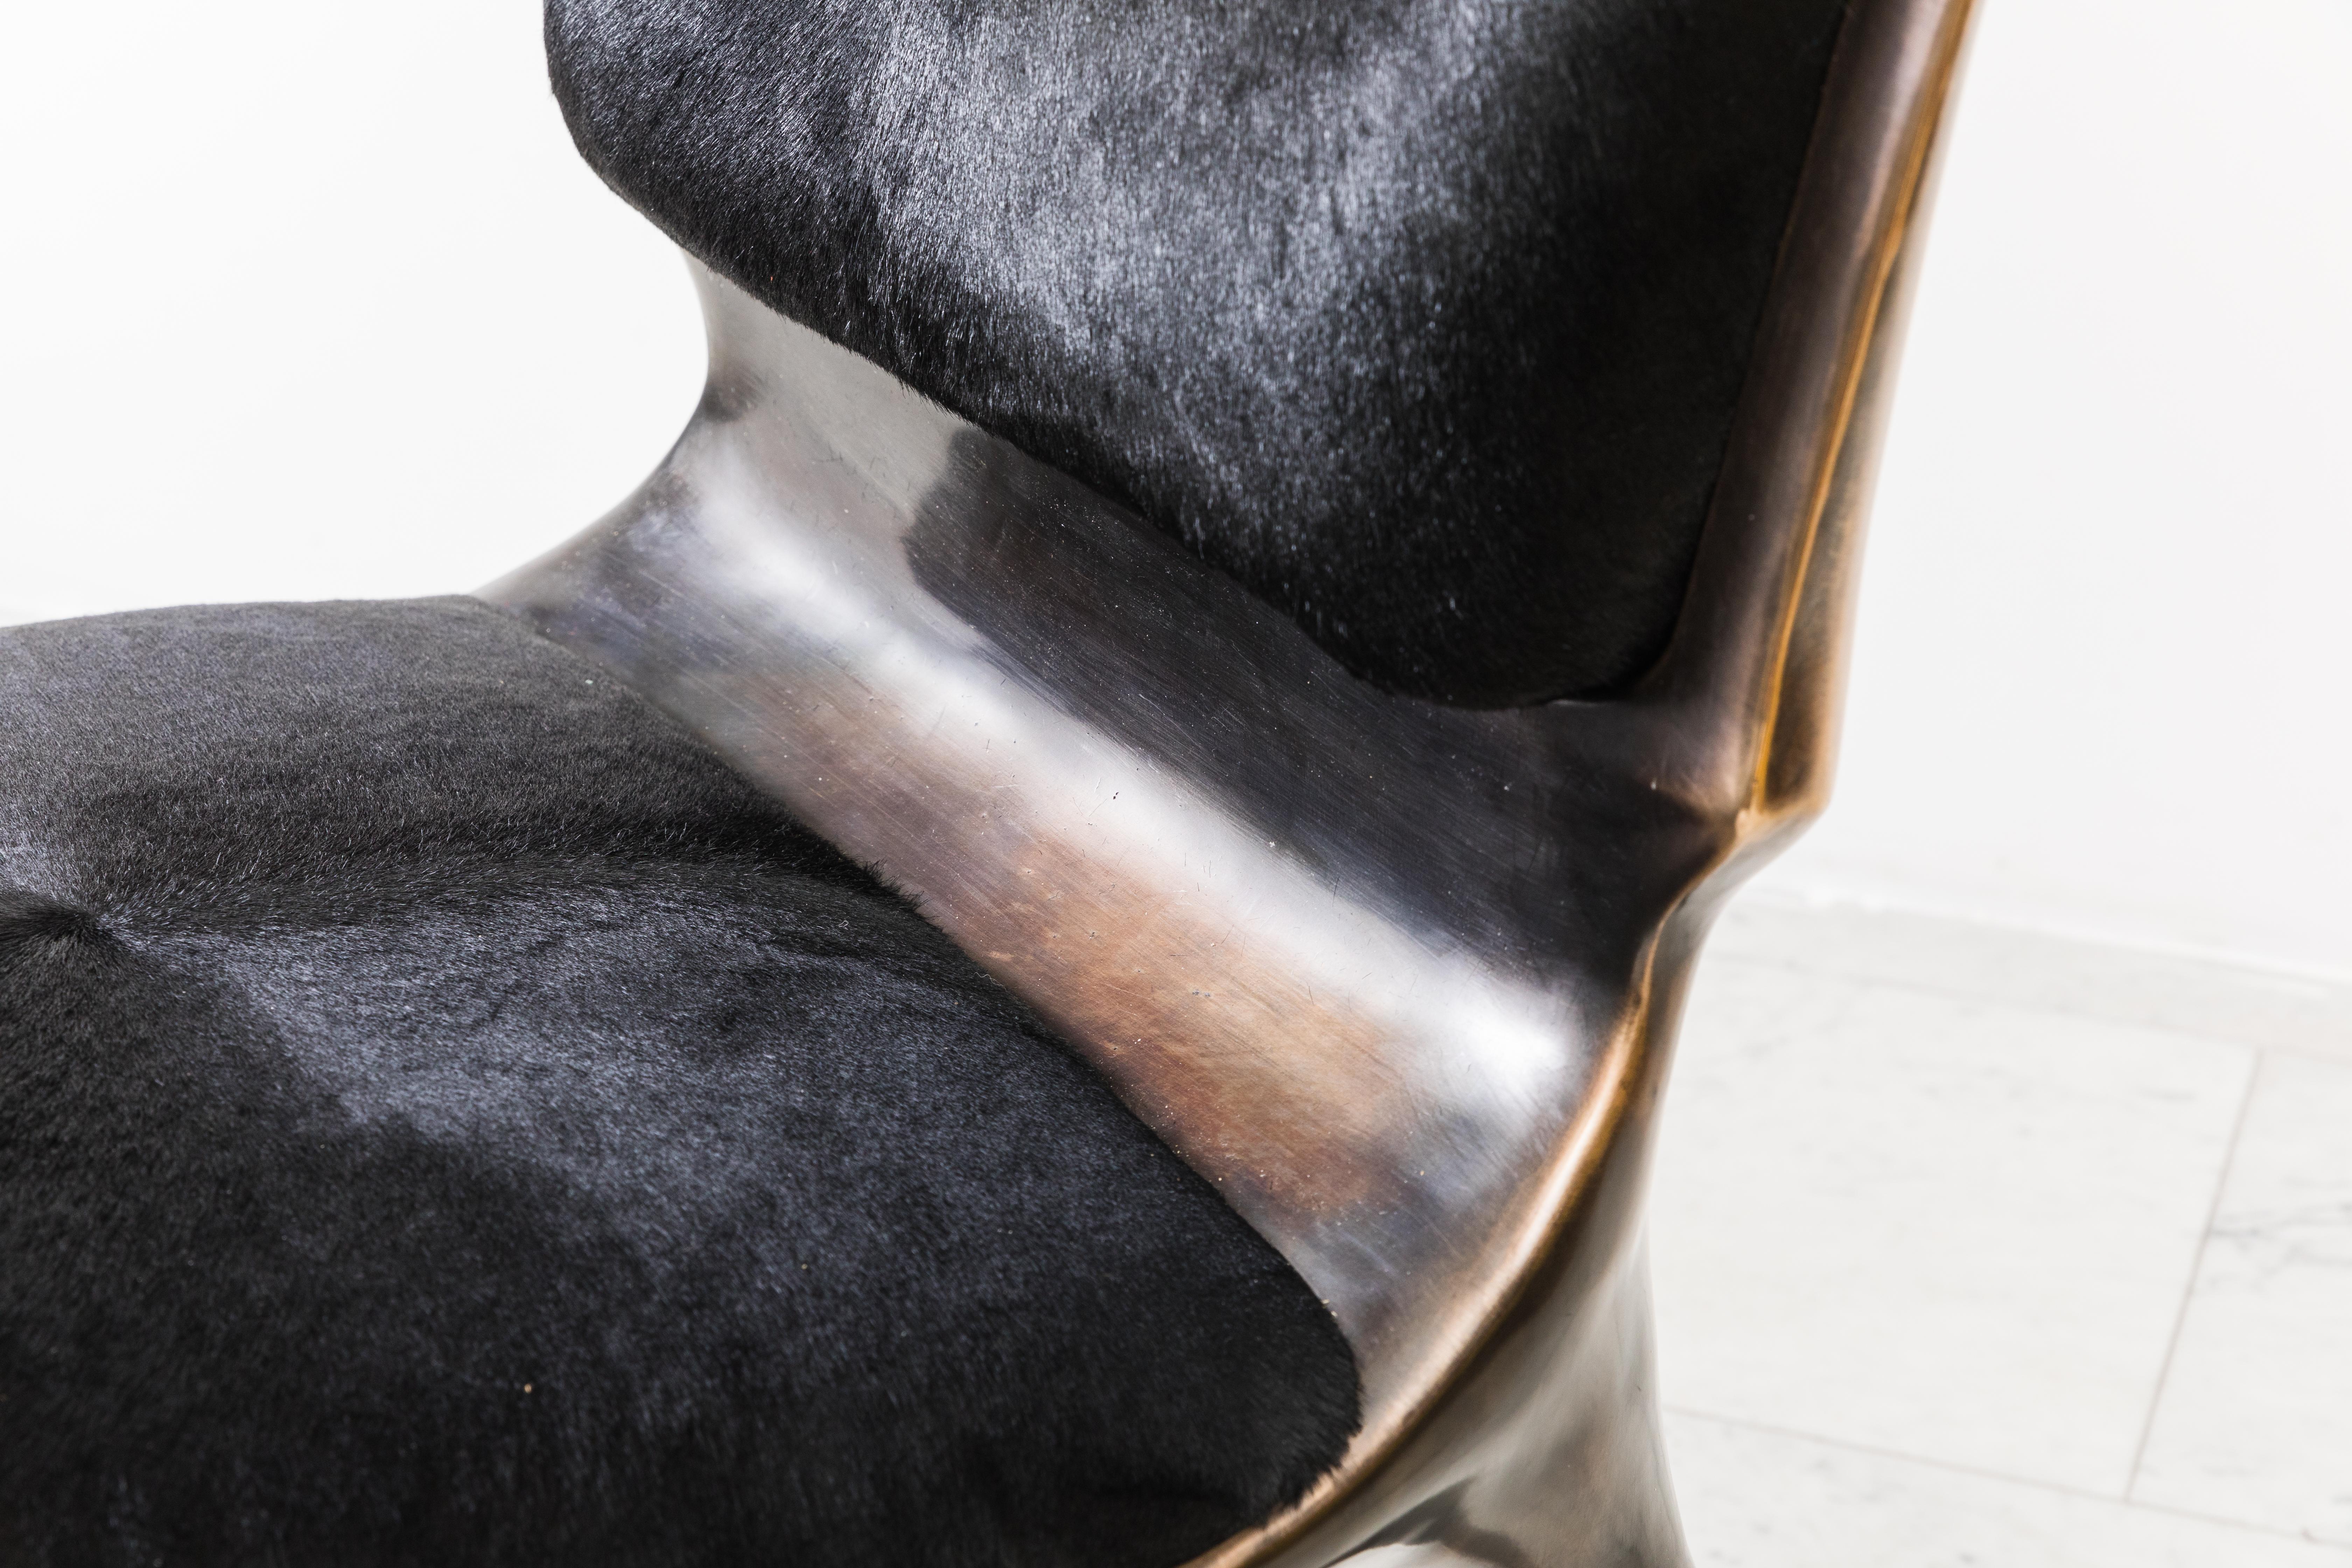 Inspired by his Biche Desk, the Tusk Chair reflects Alex Roskin penchant for an animality in form. The versatile chair can be used as a salon chair, a desk chair, or grouped for a dining set.

The chair features an mammalian physicality,